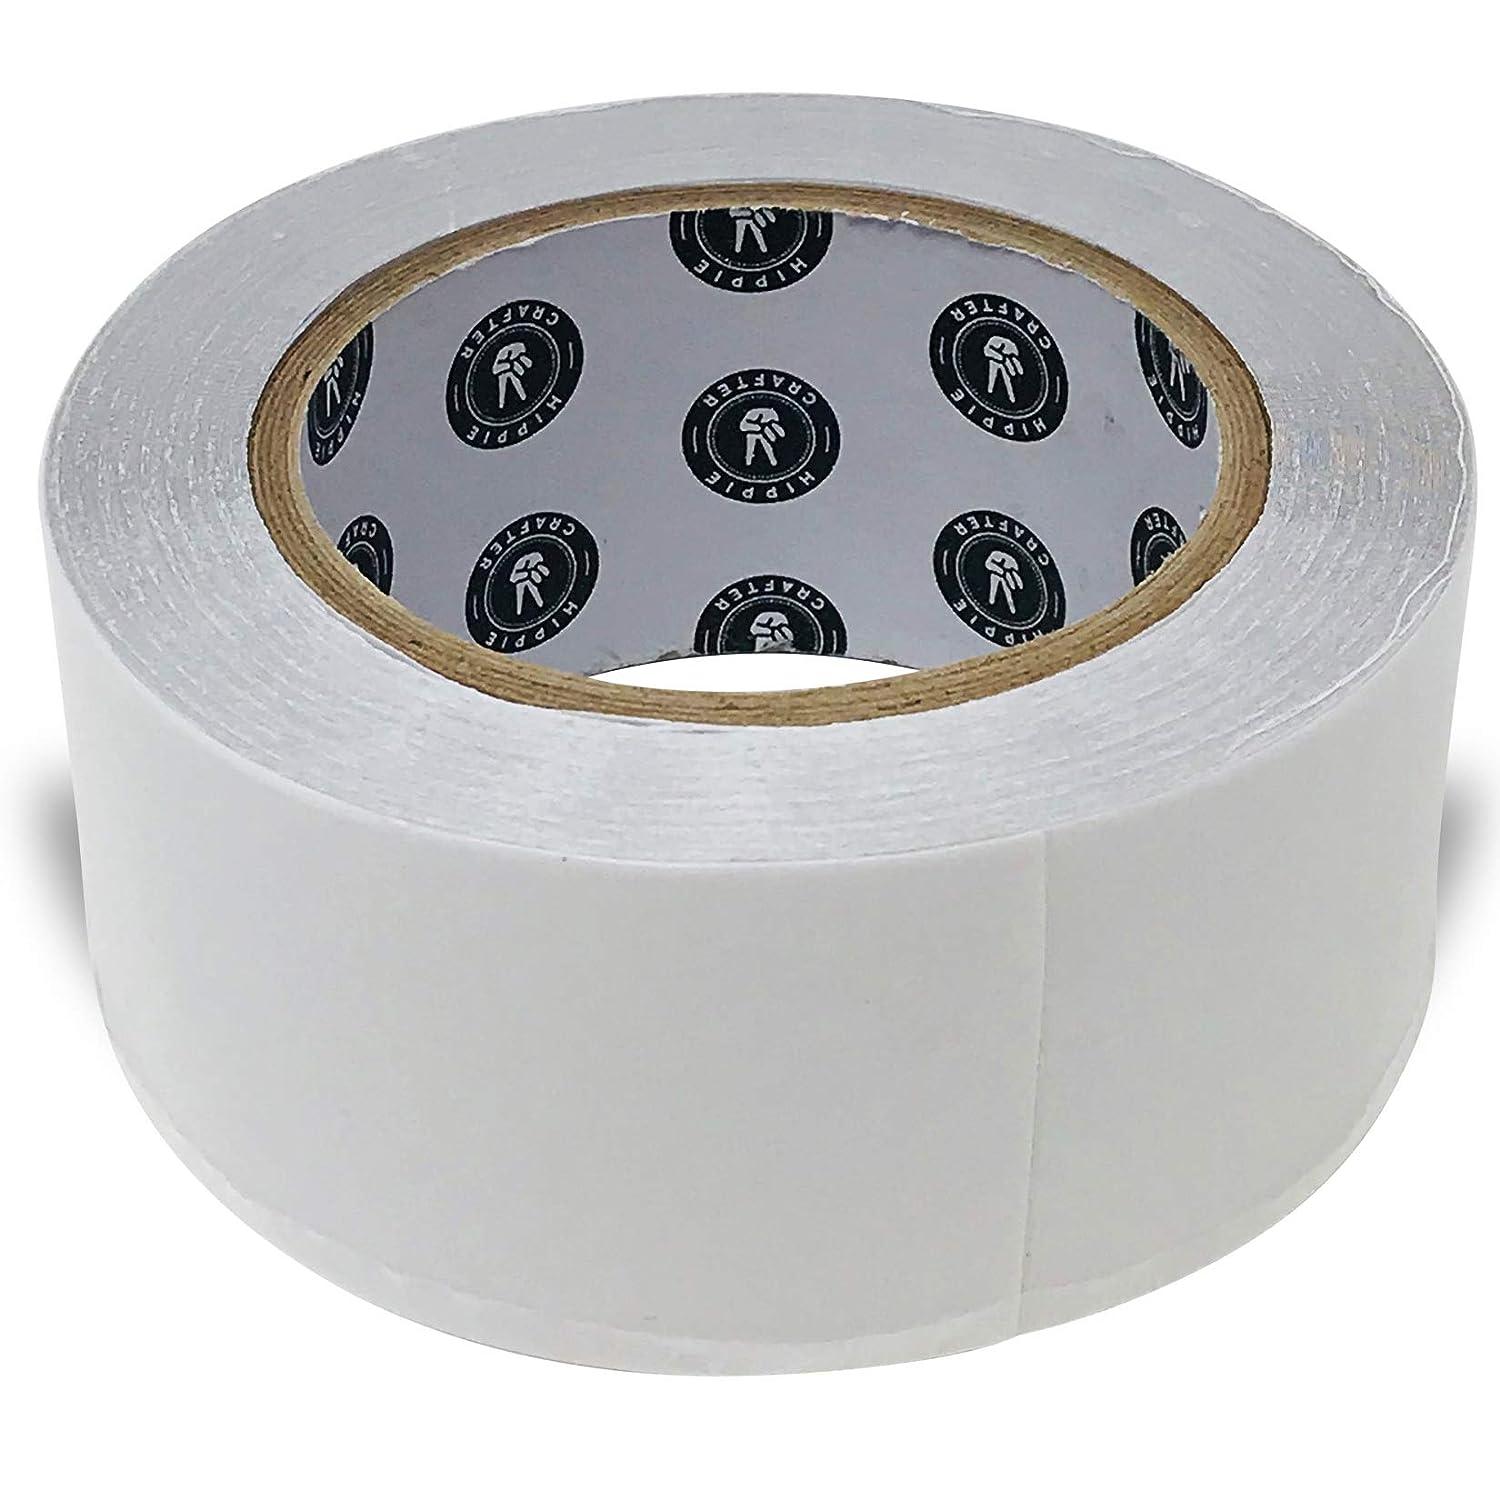  Gaffer Power Strong Double Sided Tape Heavy Duty, Nano Double  Sided Adhesive Clear Tape, Double Sided Tape for Crafts, Two Sided Tape  for Walls Removable